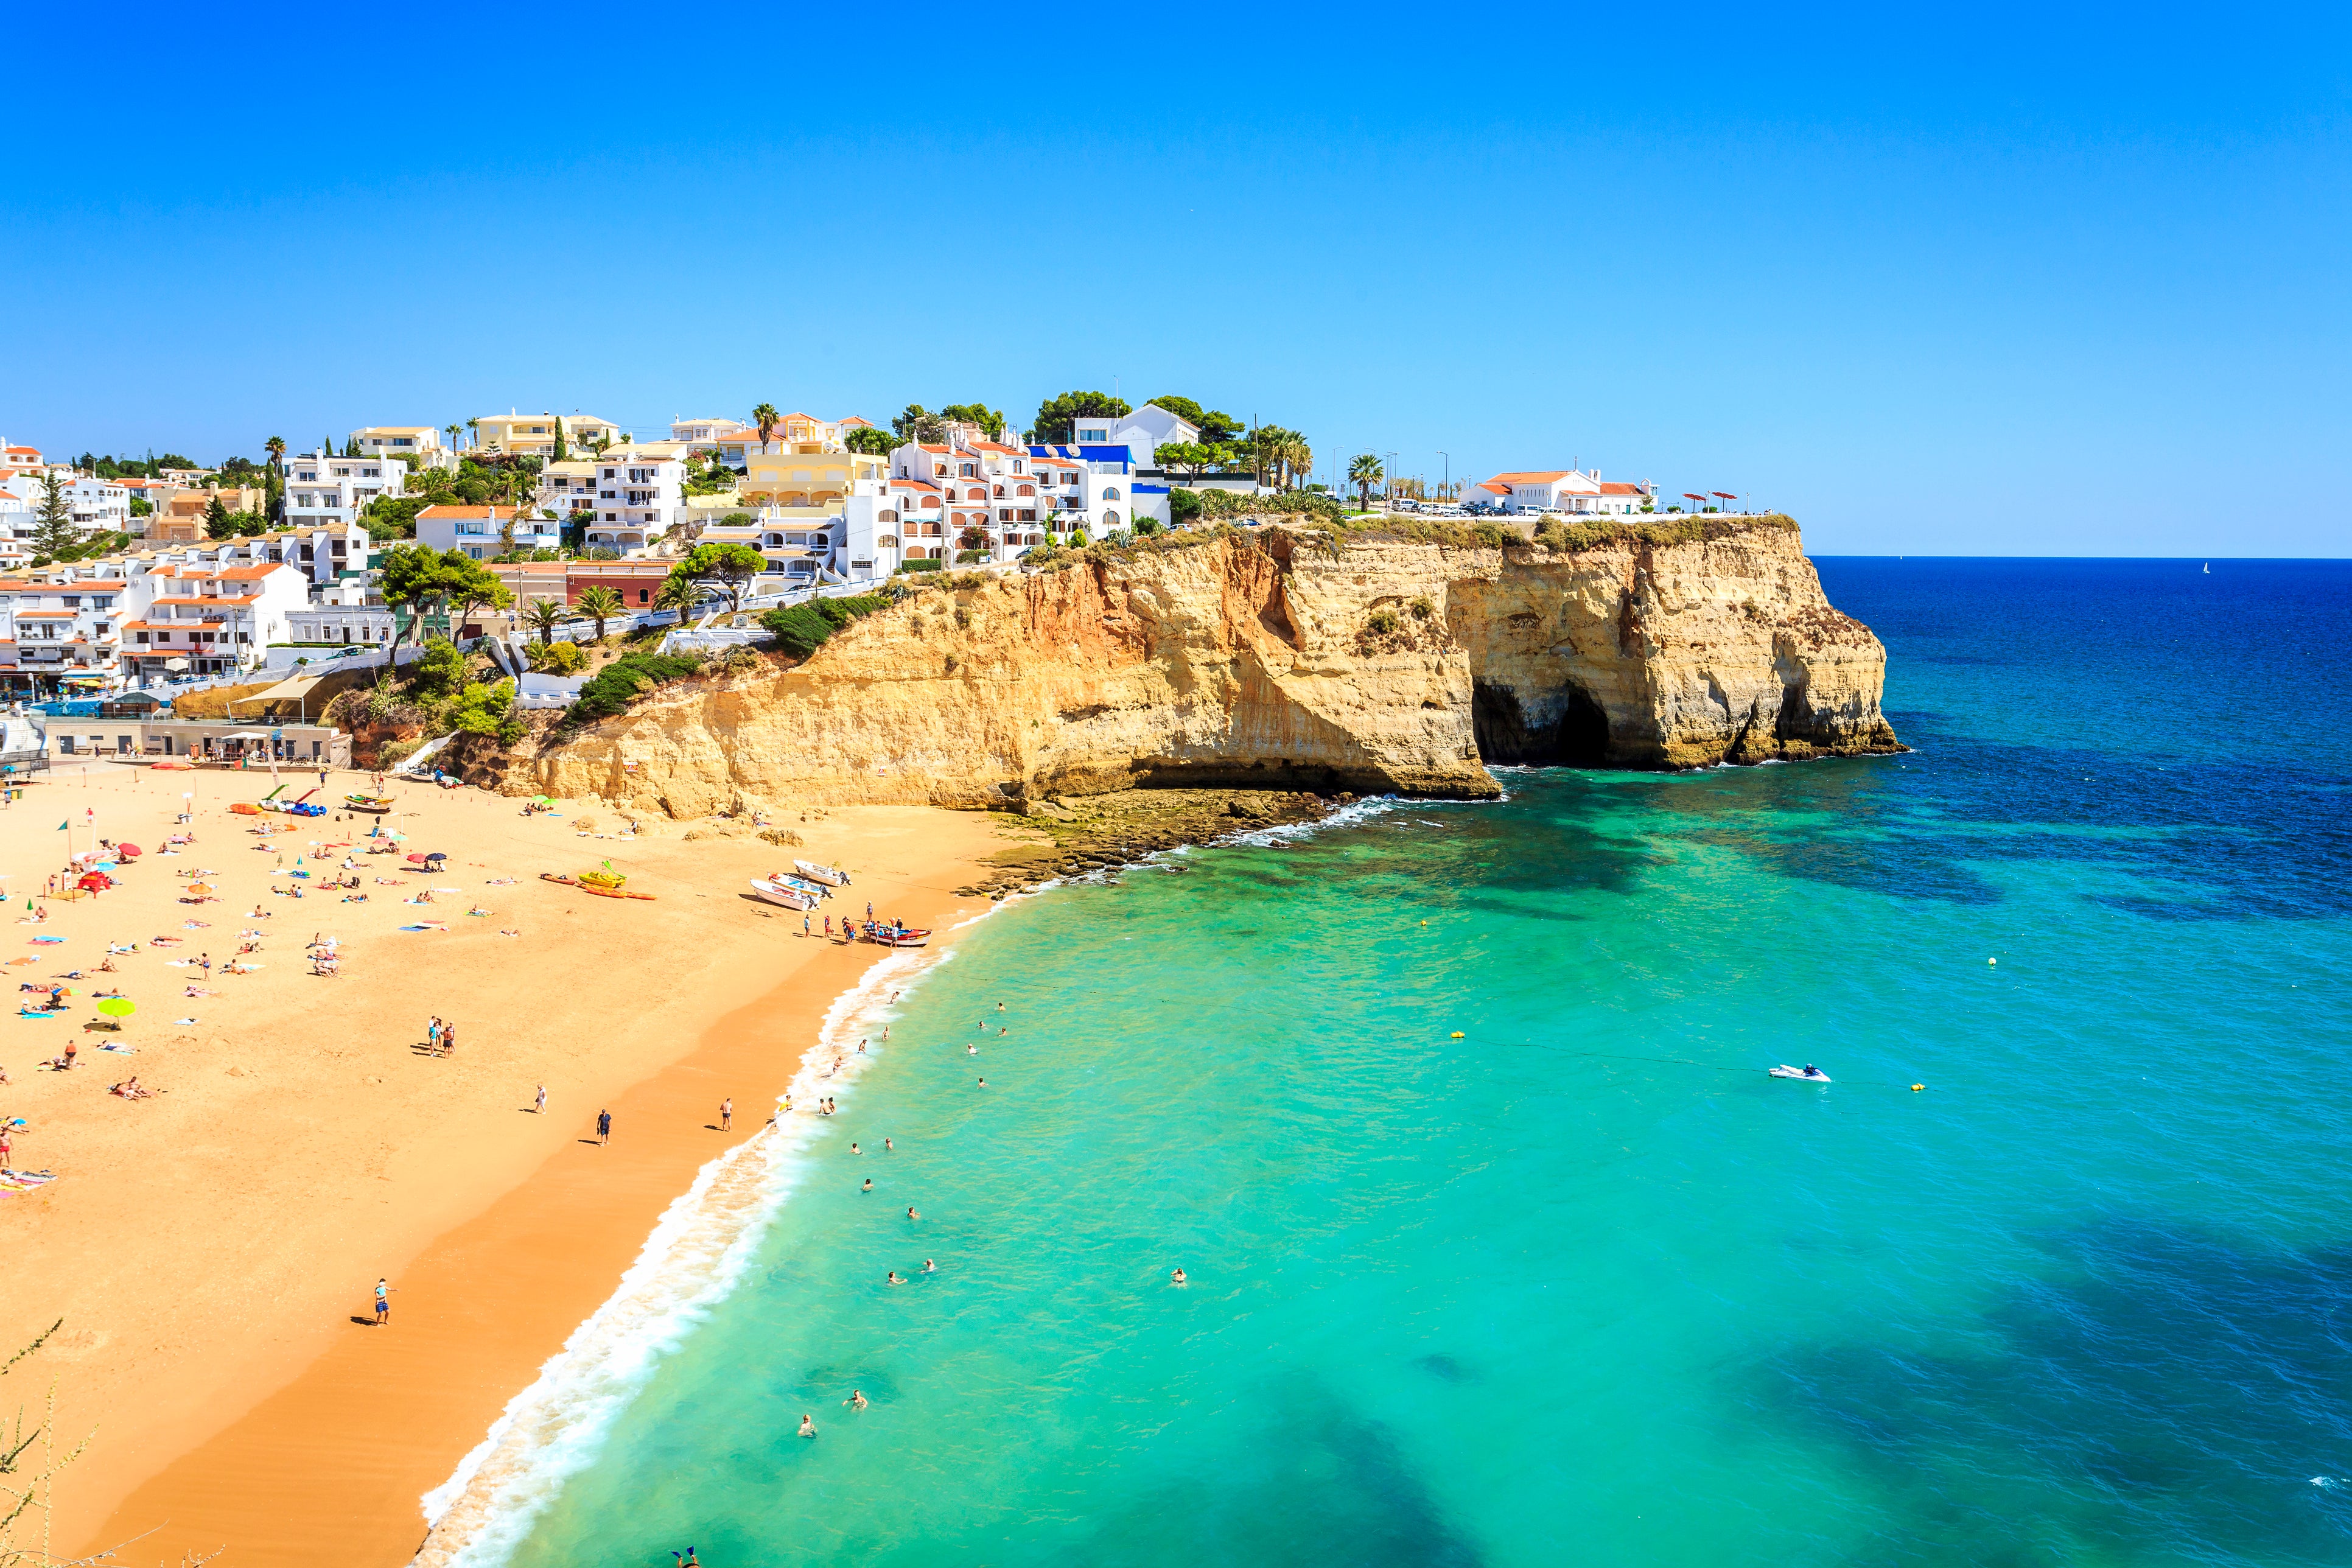 Many Britons are booking holidays to the Algarve and other regions of Portugal